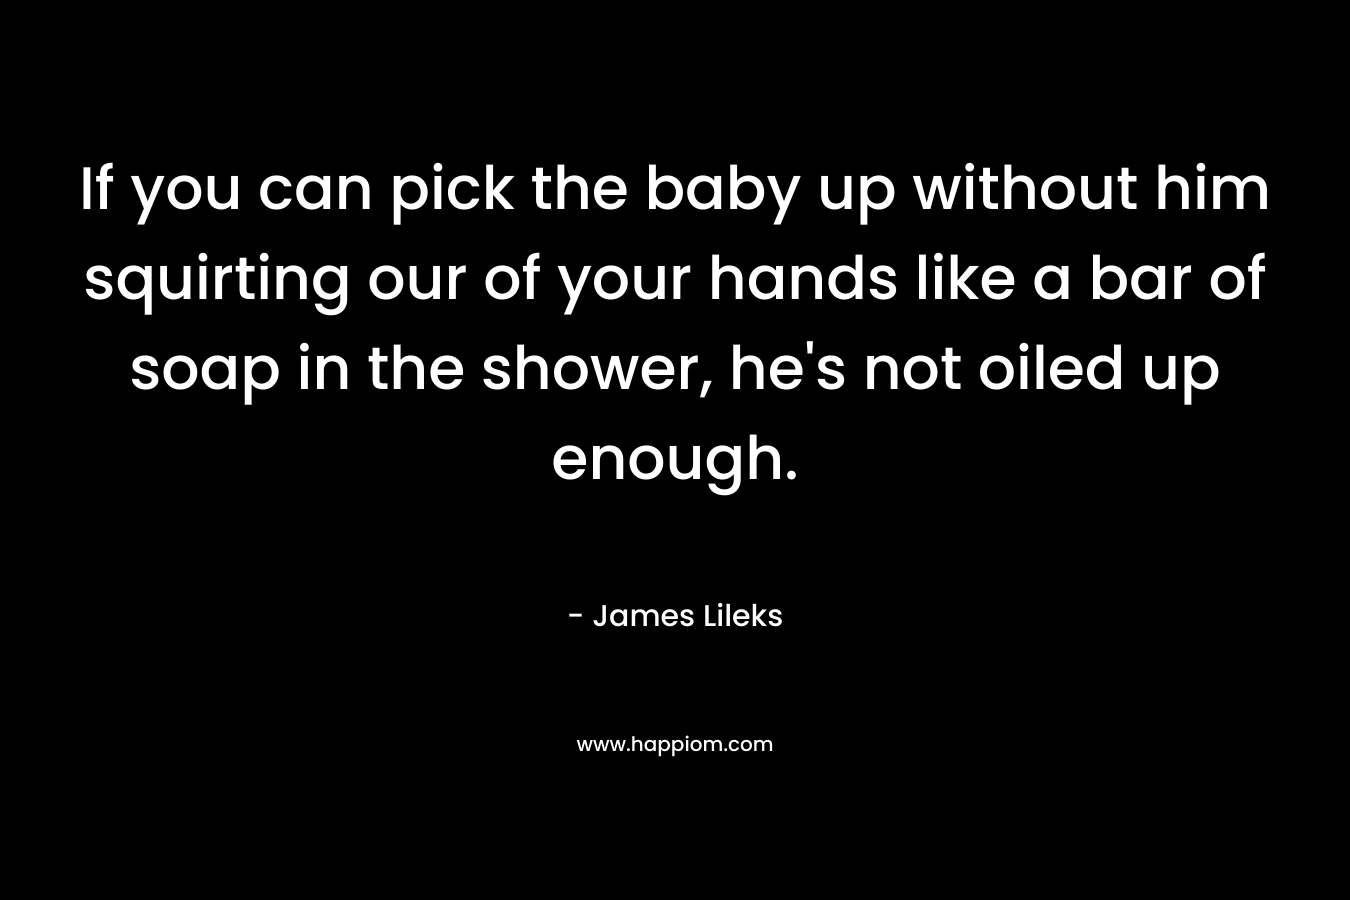 If you can pick the baby up without him squirting our of your hands like a bar of soap in the shower, he's not oiled up enough.